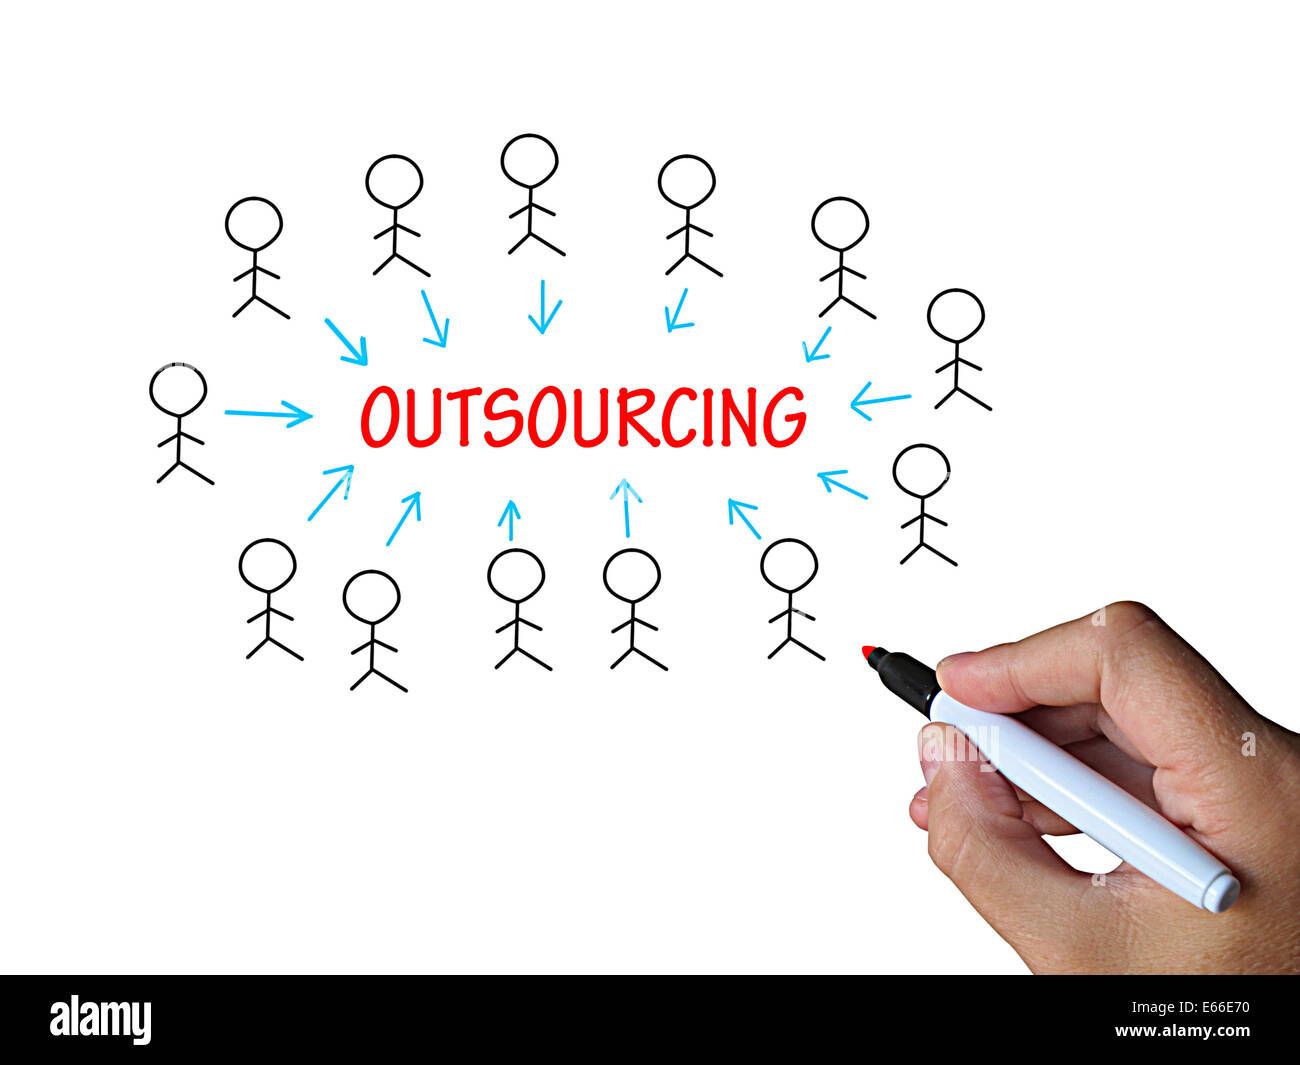 Outsourcing On Whiteboard Meaning Subcontracted Employer Or Freelancer Stock Photo